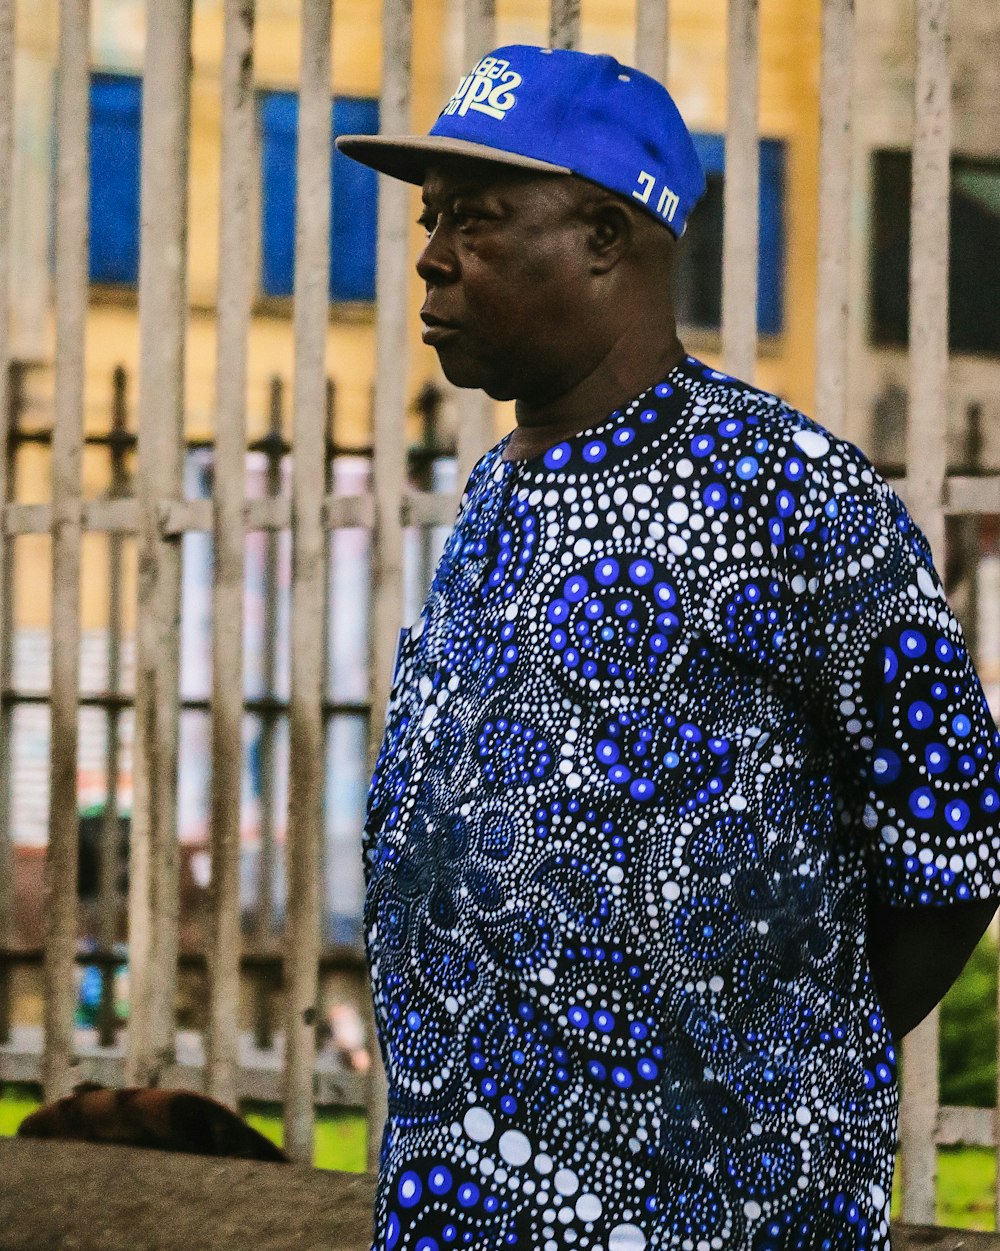 man in blue and white floral shirt wearing blue cap standing near brown metal fence during